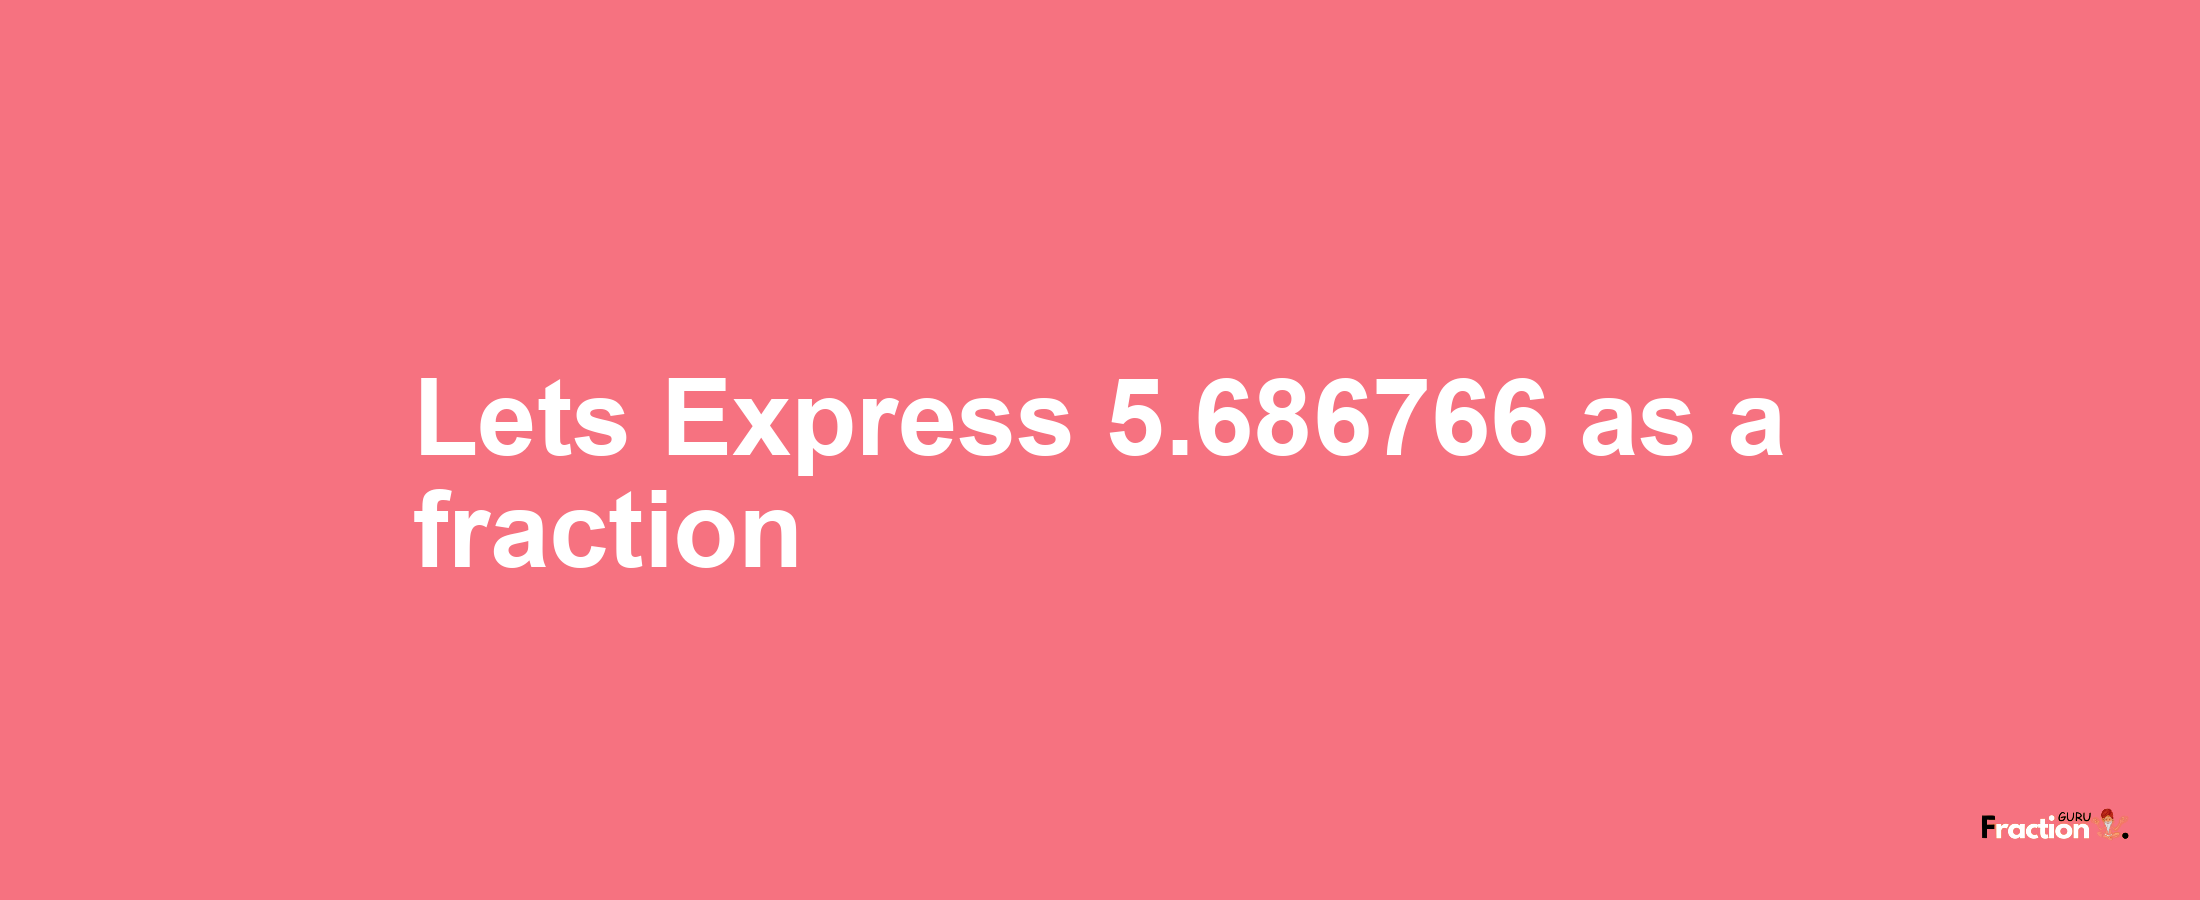 Lets Express 5.686766 as afraction